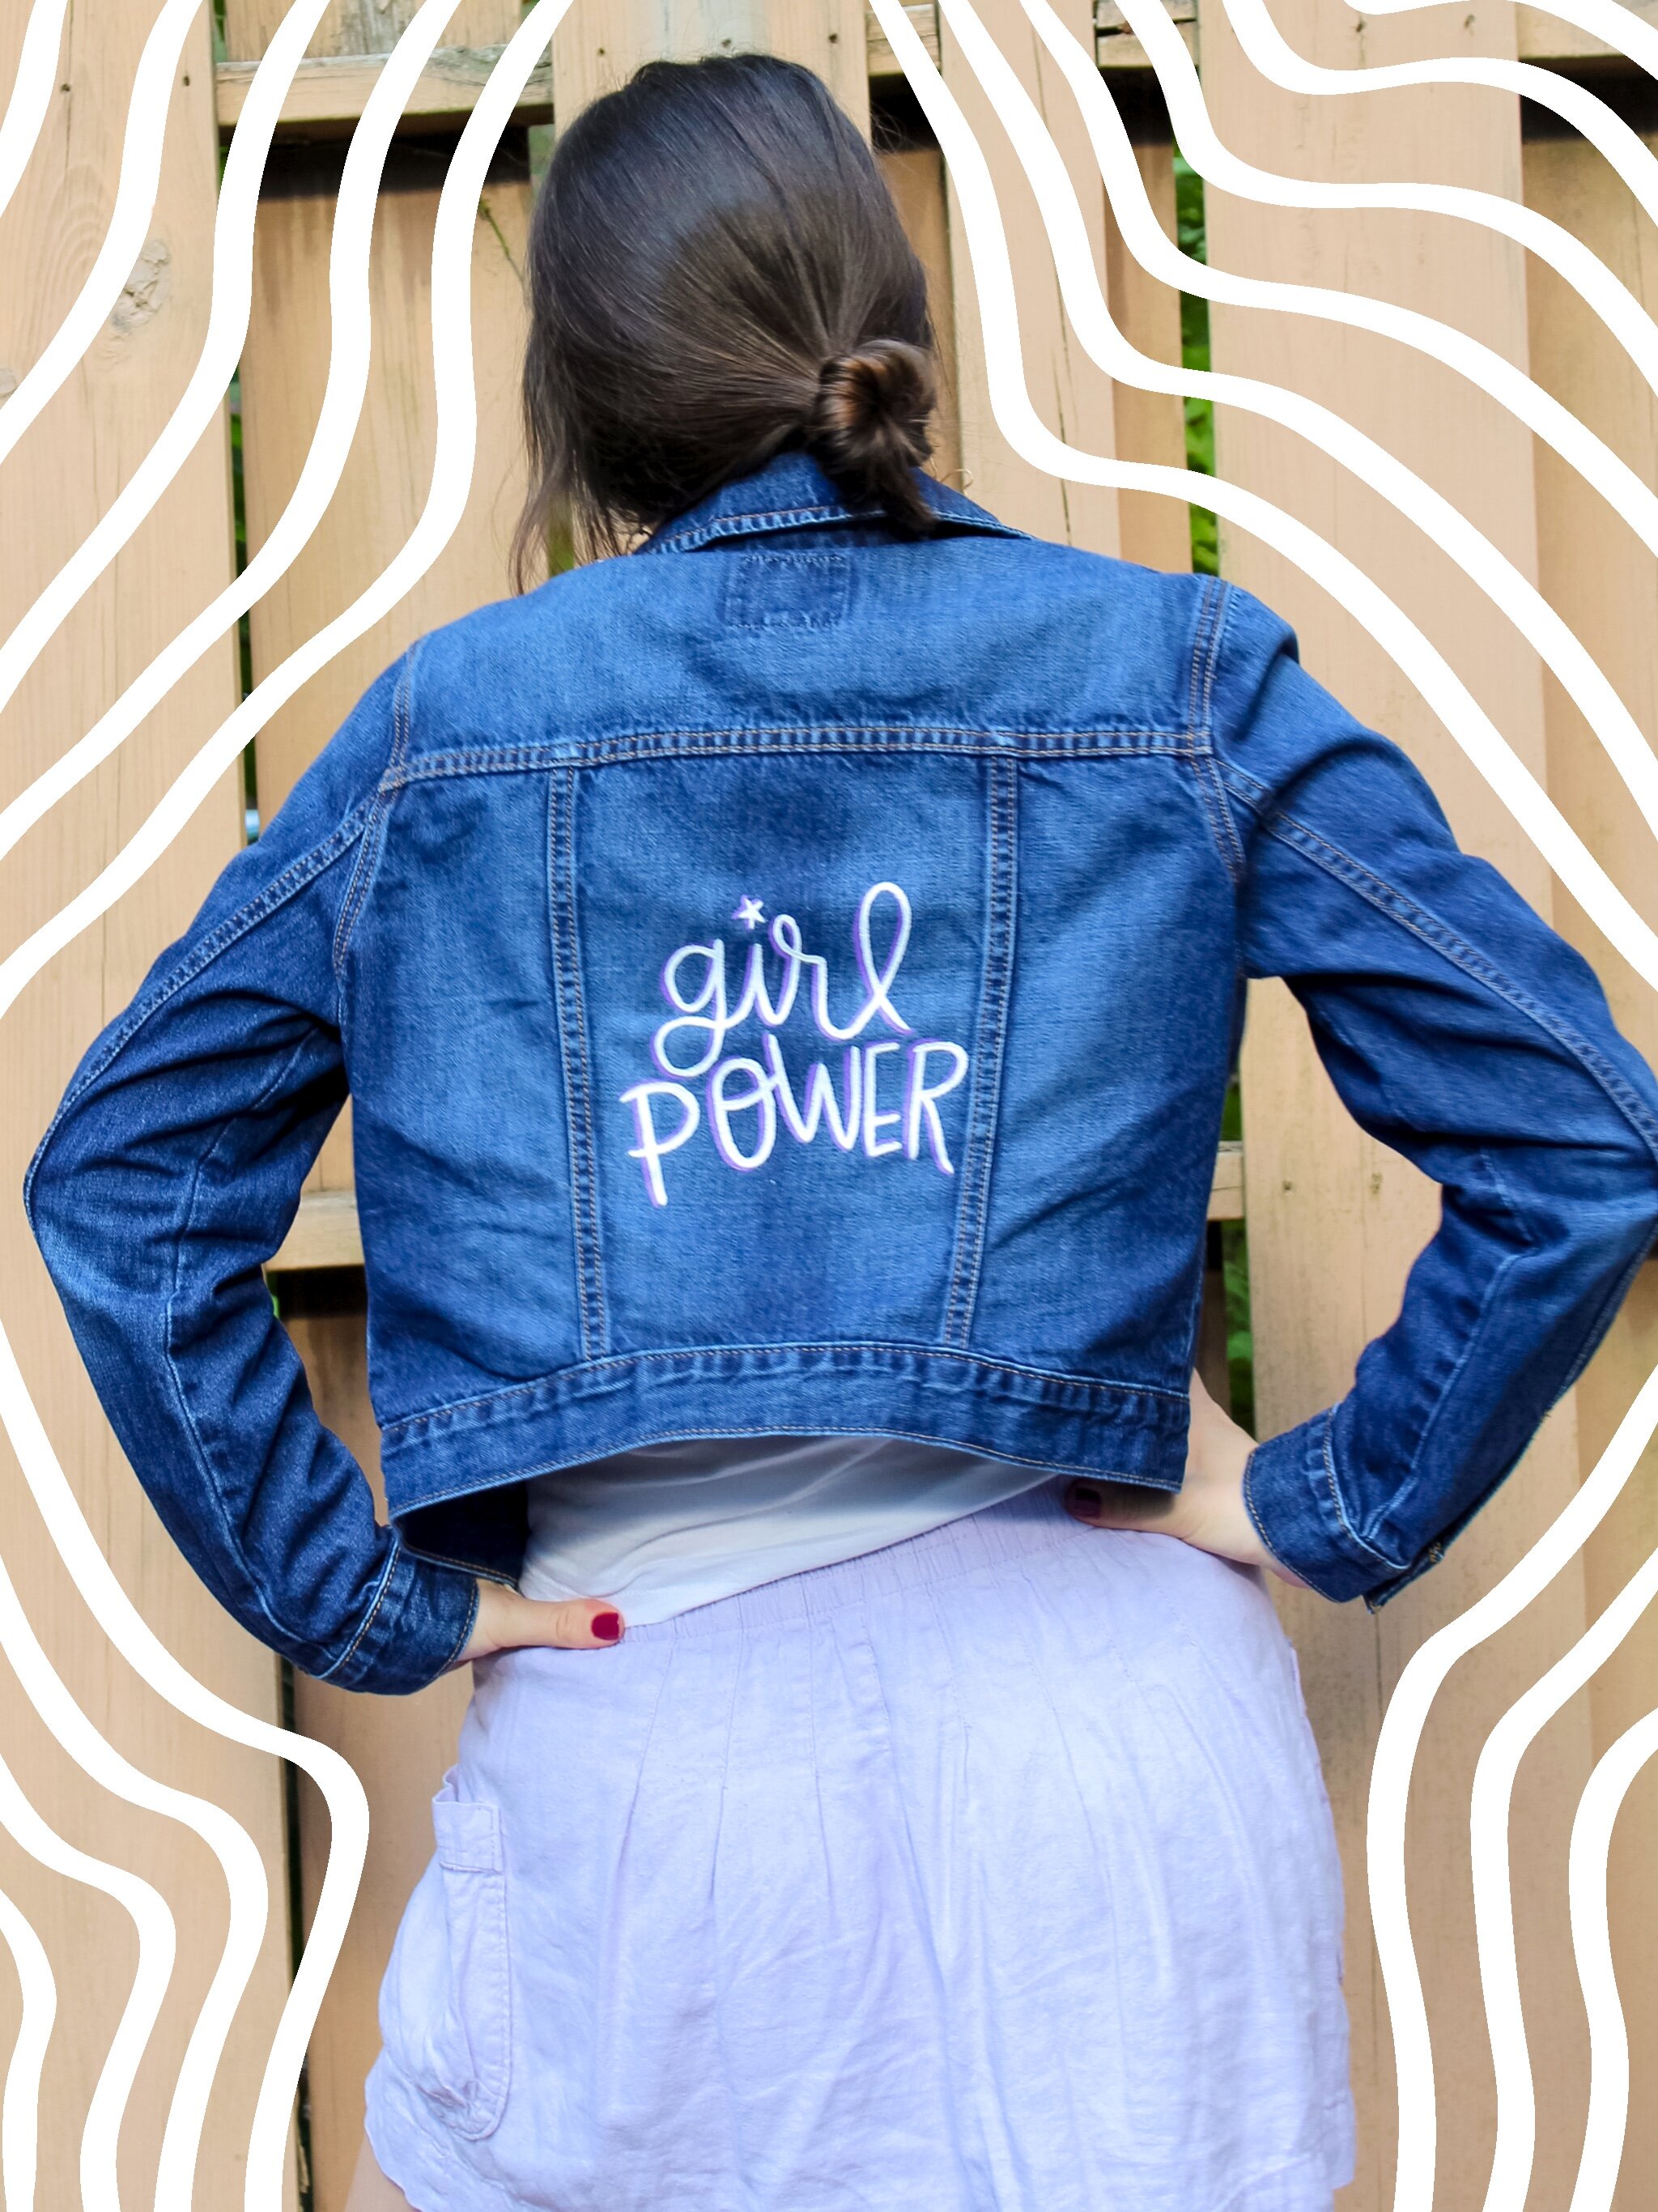 Painted Denim Jacket Projects  Photos videos logos illustrations and  branding on Behance